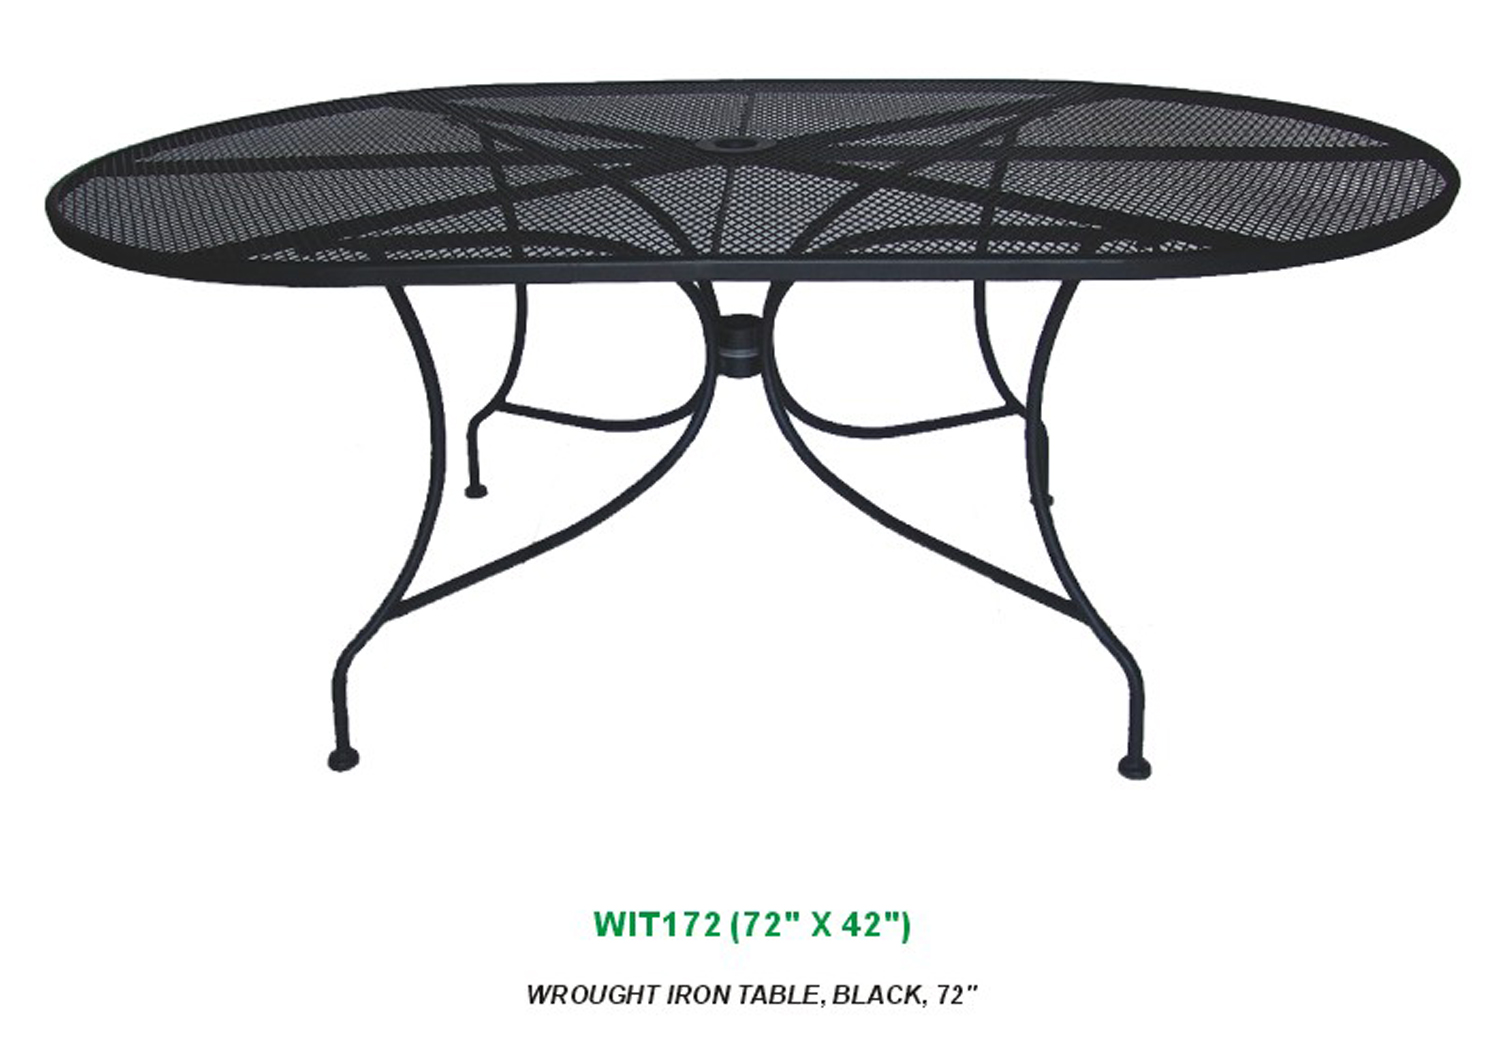 72"x42" Wrought Iron Table